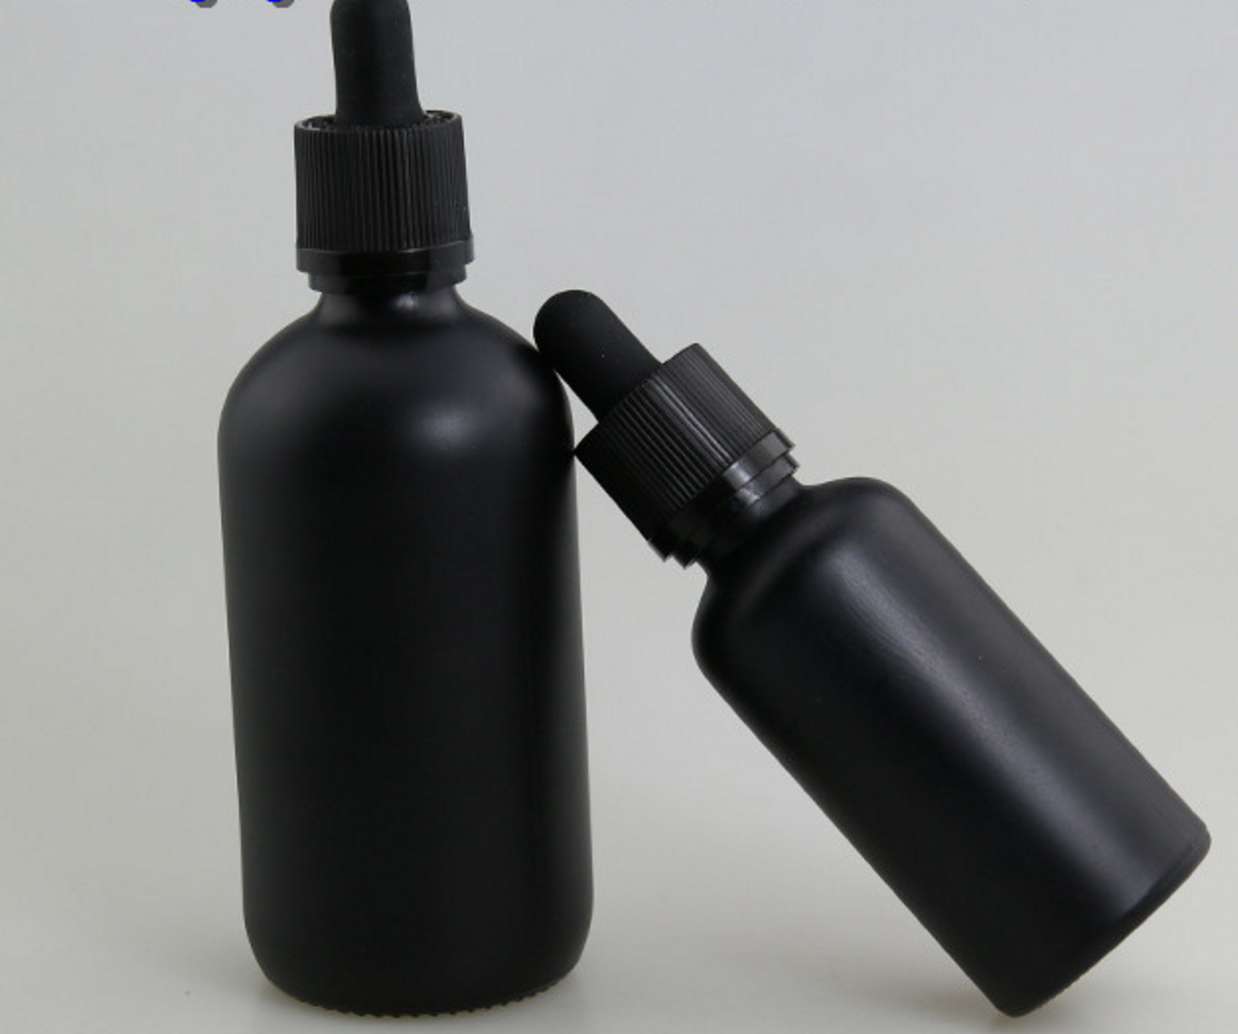 100ml facial oil black glass bottles with black droppers